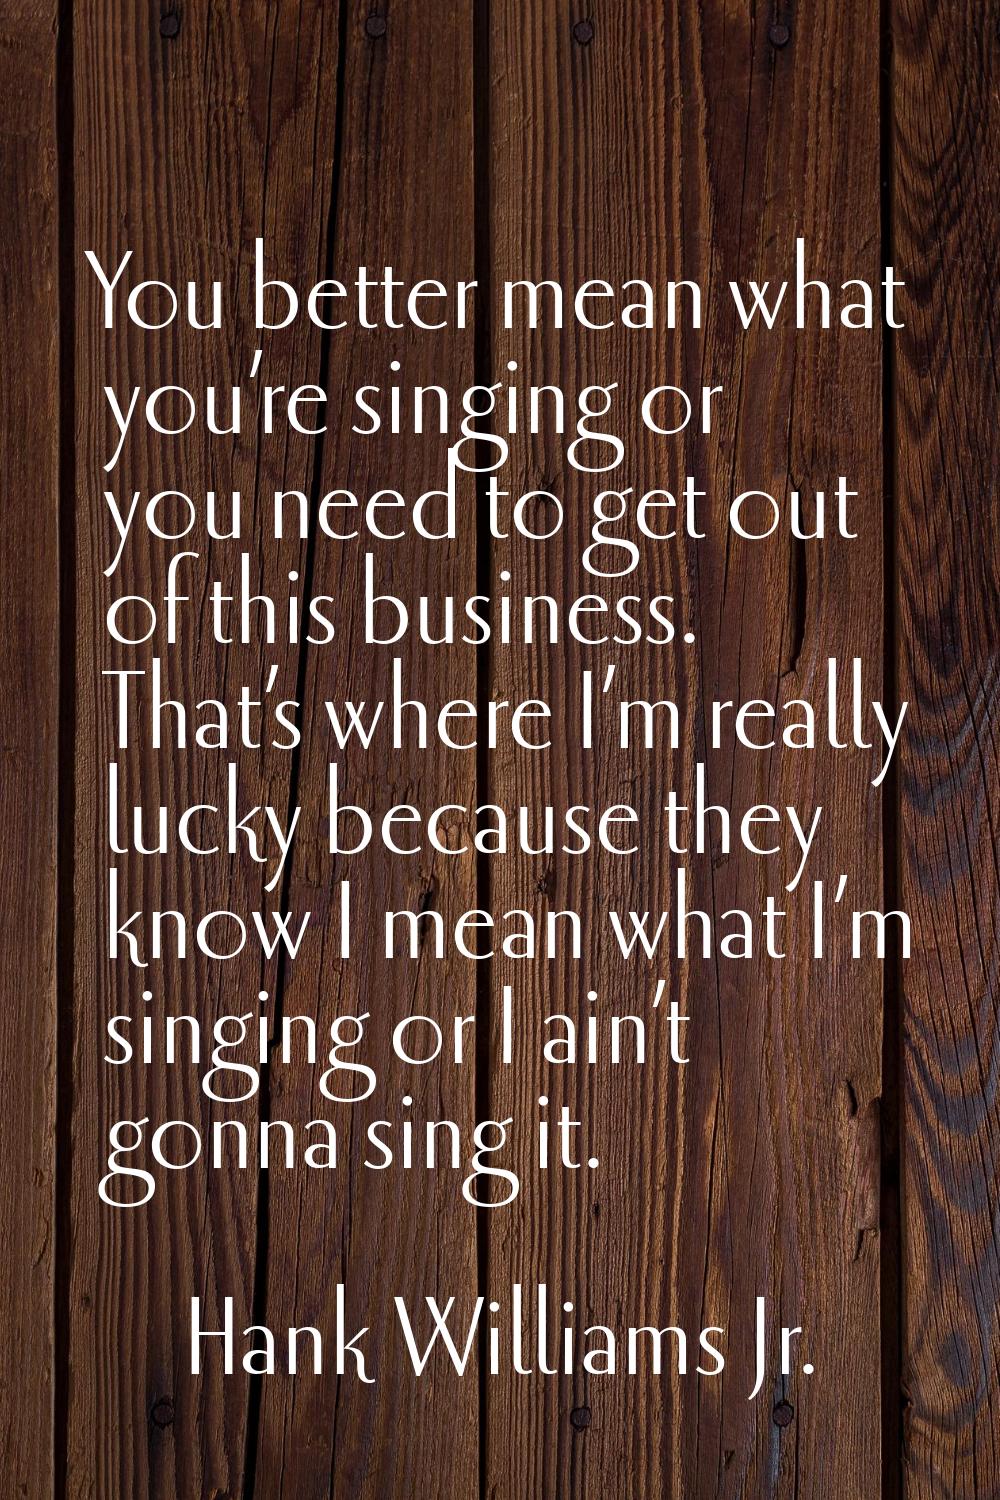 You better mean what you’re singing or you need to get out of this business. That’s where I’m reall